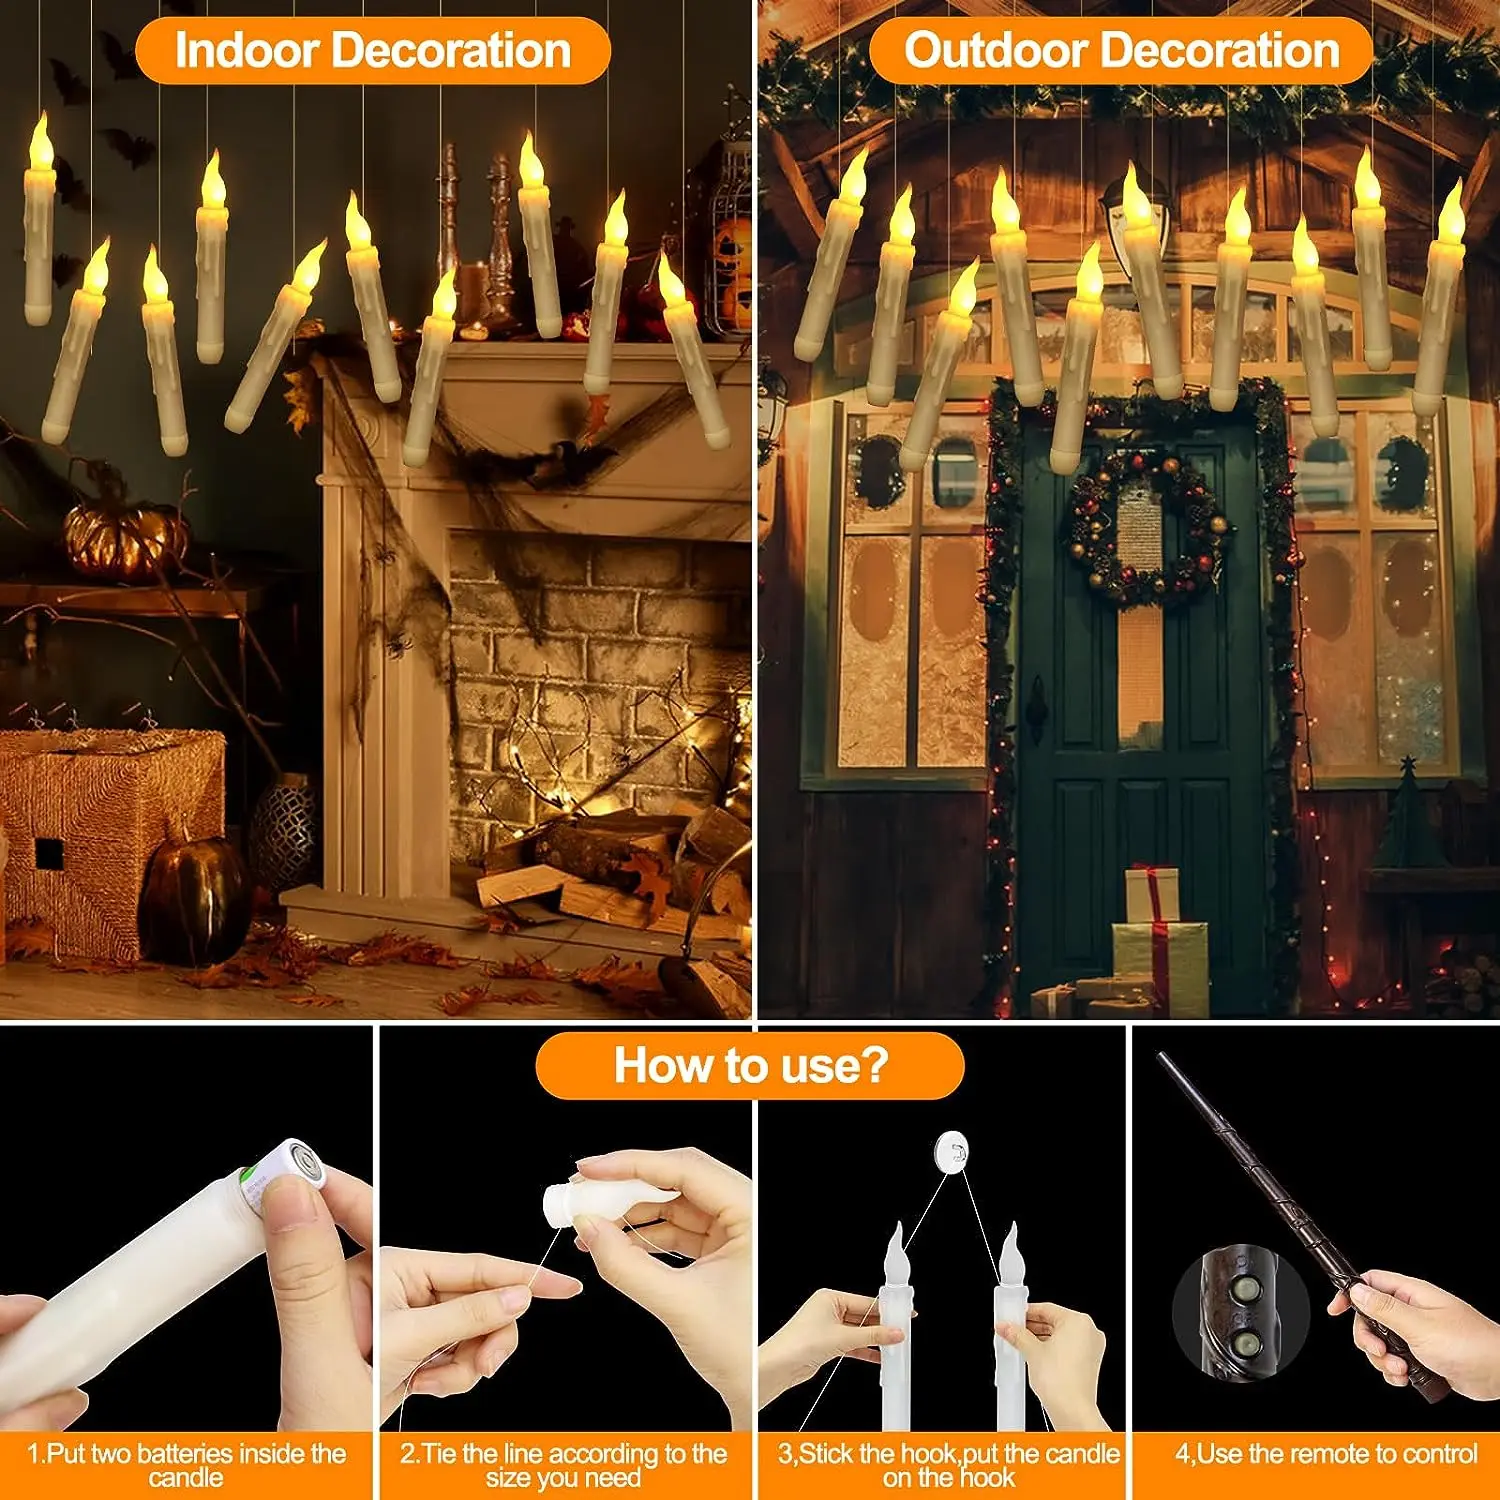 https://ae01.alicdn.com/kf/Scb6d133602734e1cbd1f9022cb4fef057/Halloween-Christmas-Floating-Candles-Magic-Wand-Remote-Hanging-Operated-Battery-Flameless-Candles-Warm-Light-Birthday-Decoration.jpg